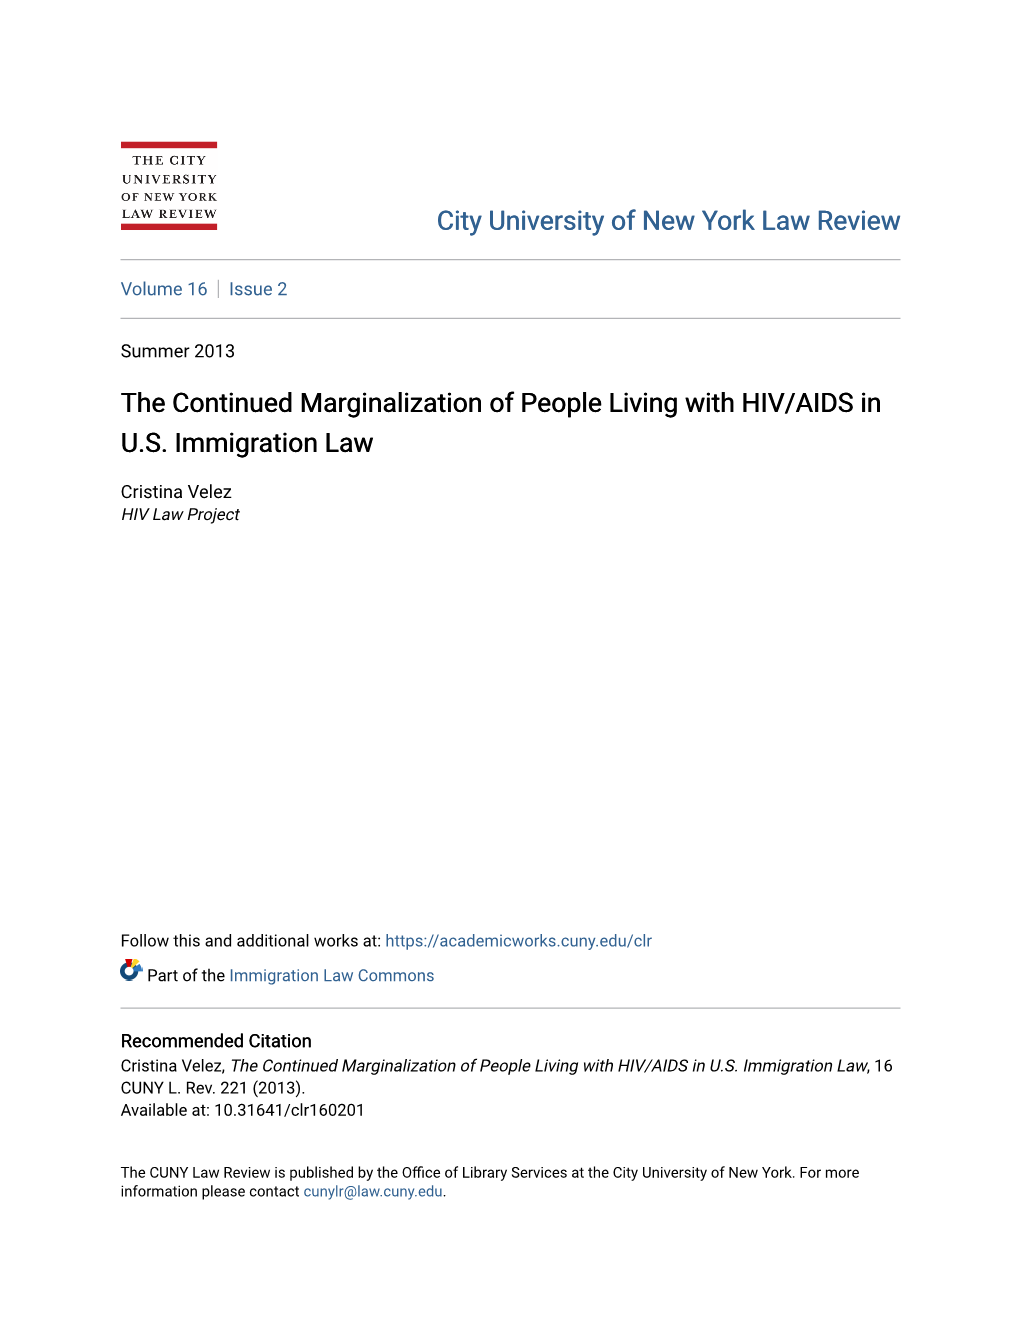 The Continued Marginalization of People Living with HIV/AIDS in U.S. Immigration Law